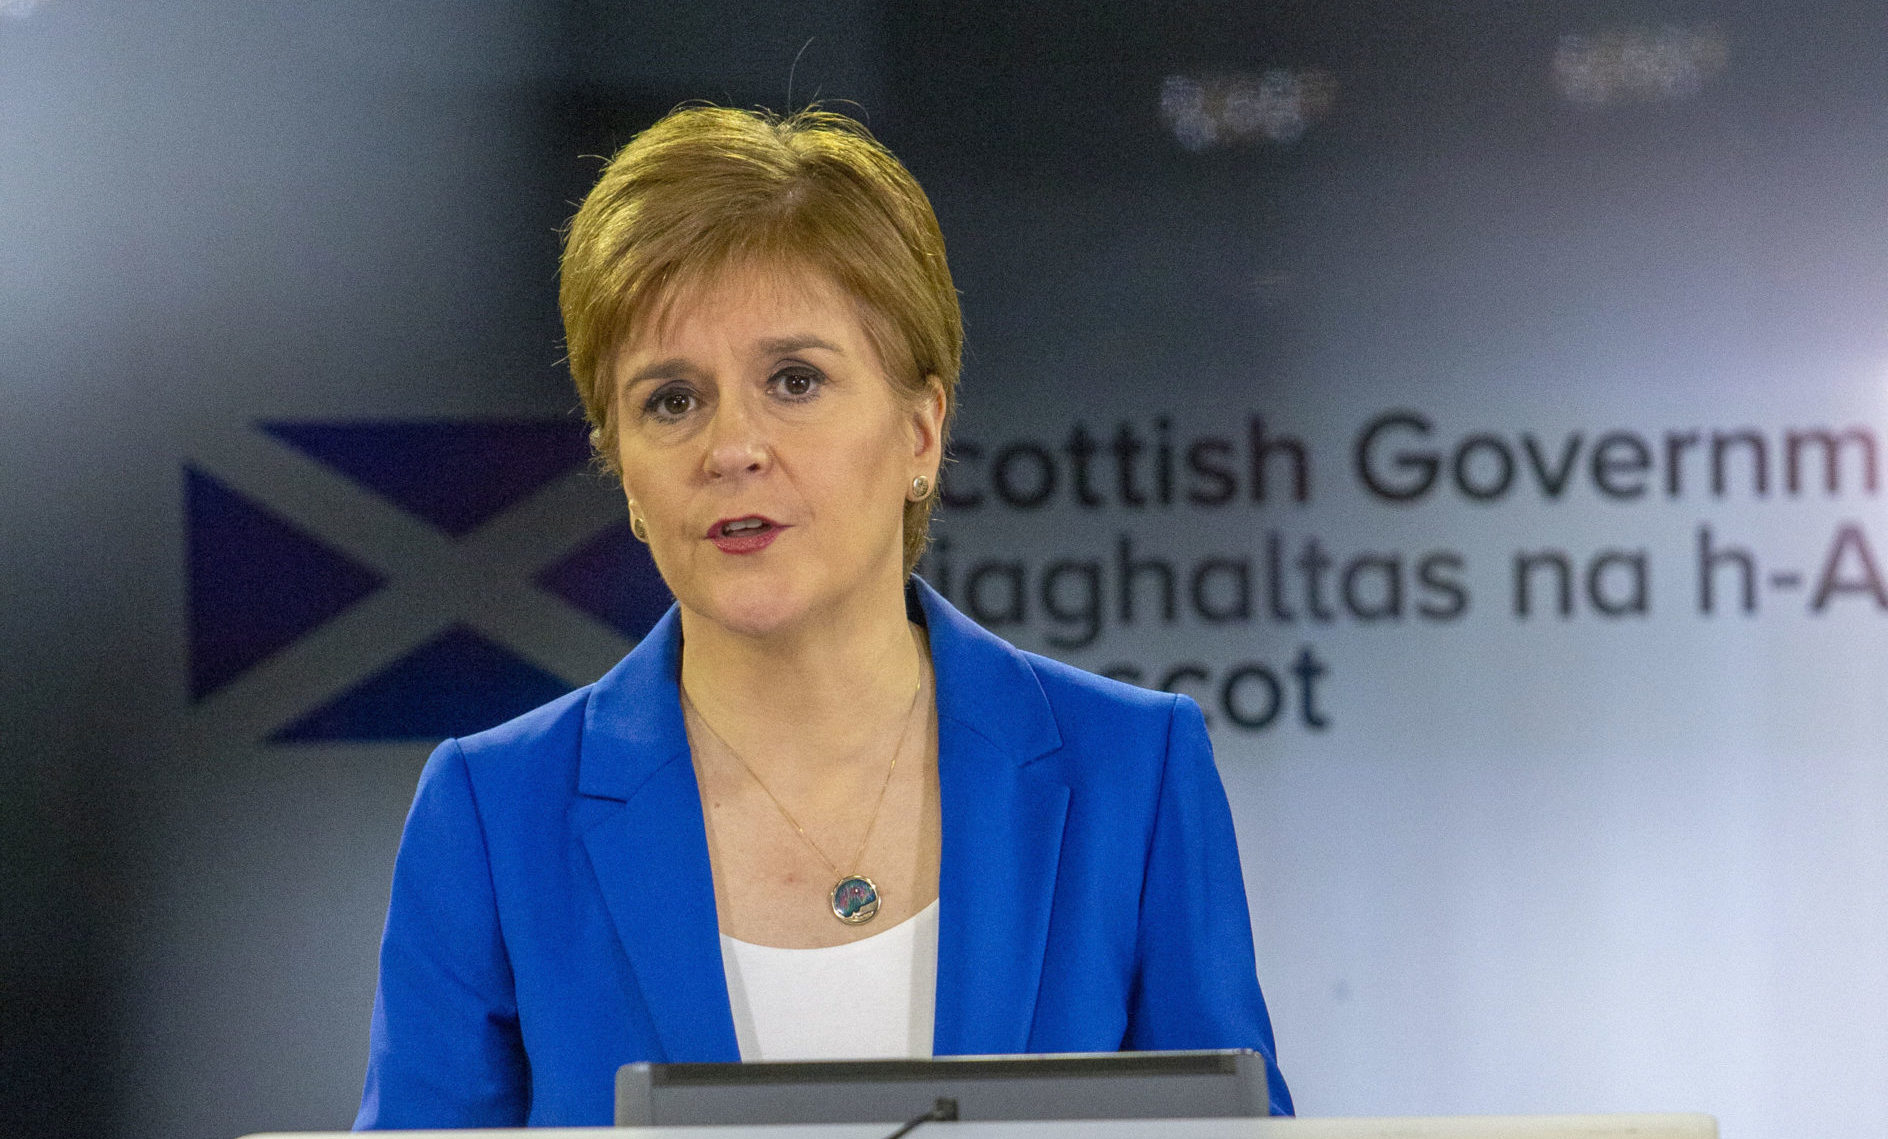 The First Minister suggested a closed-door resumption may be out of the question for Scottish football.